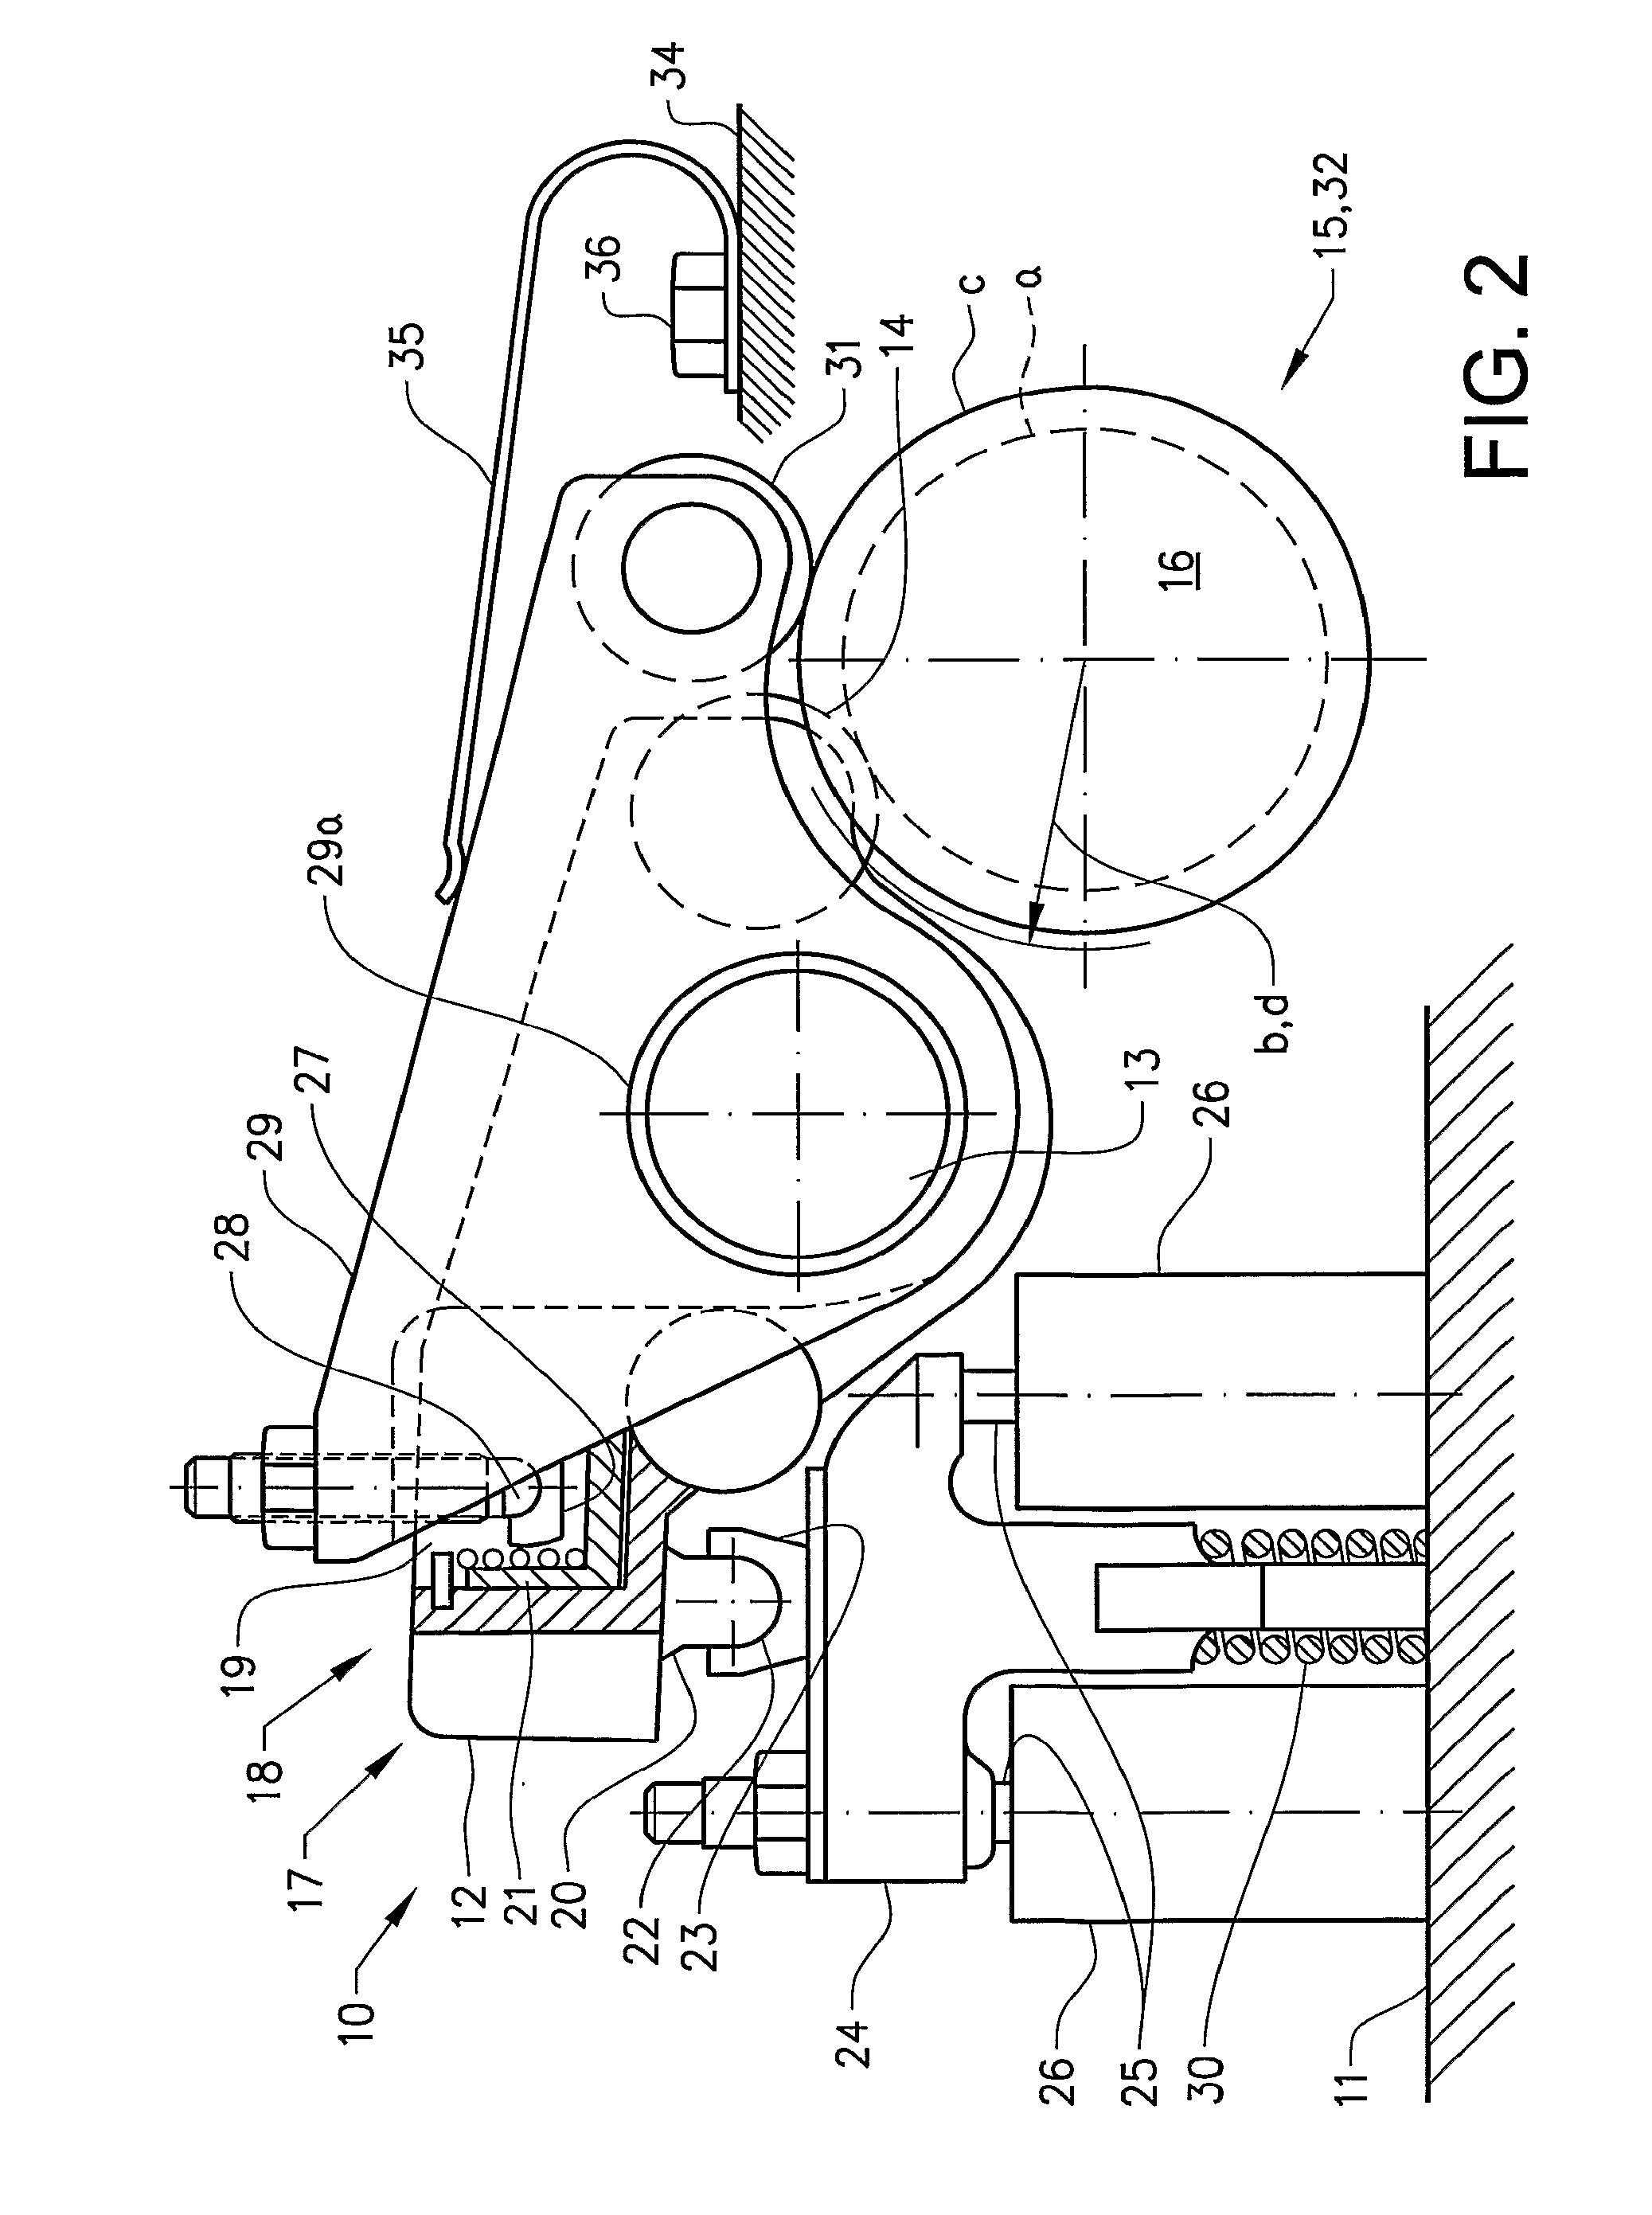 Exhaust valve mechanism for internal combustion engine